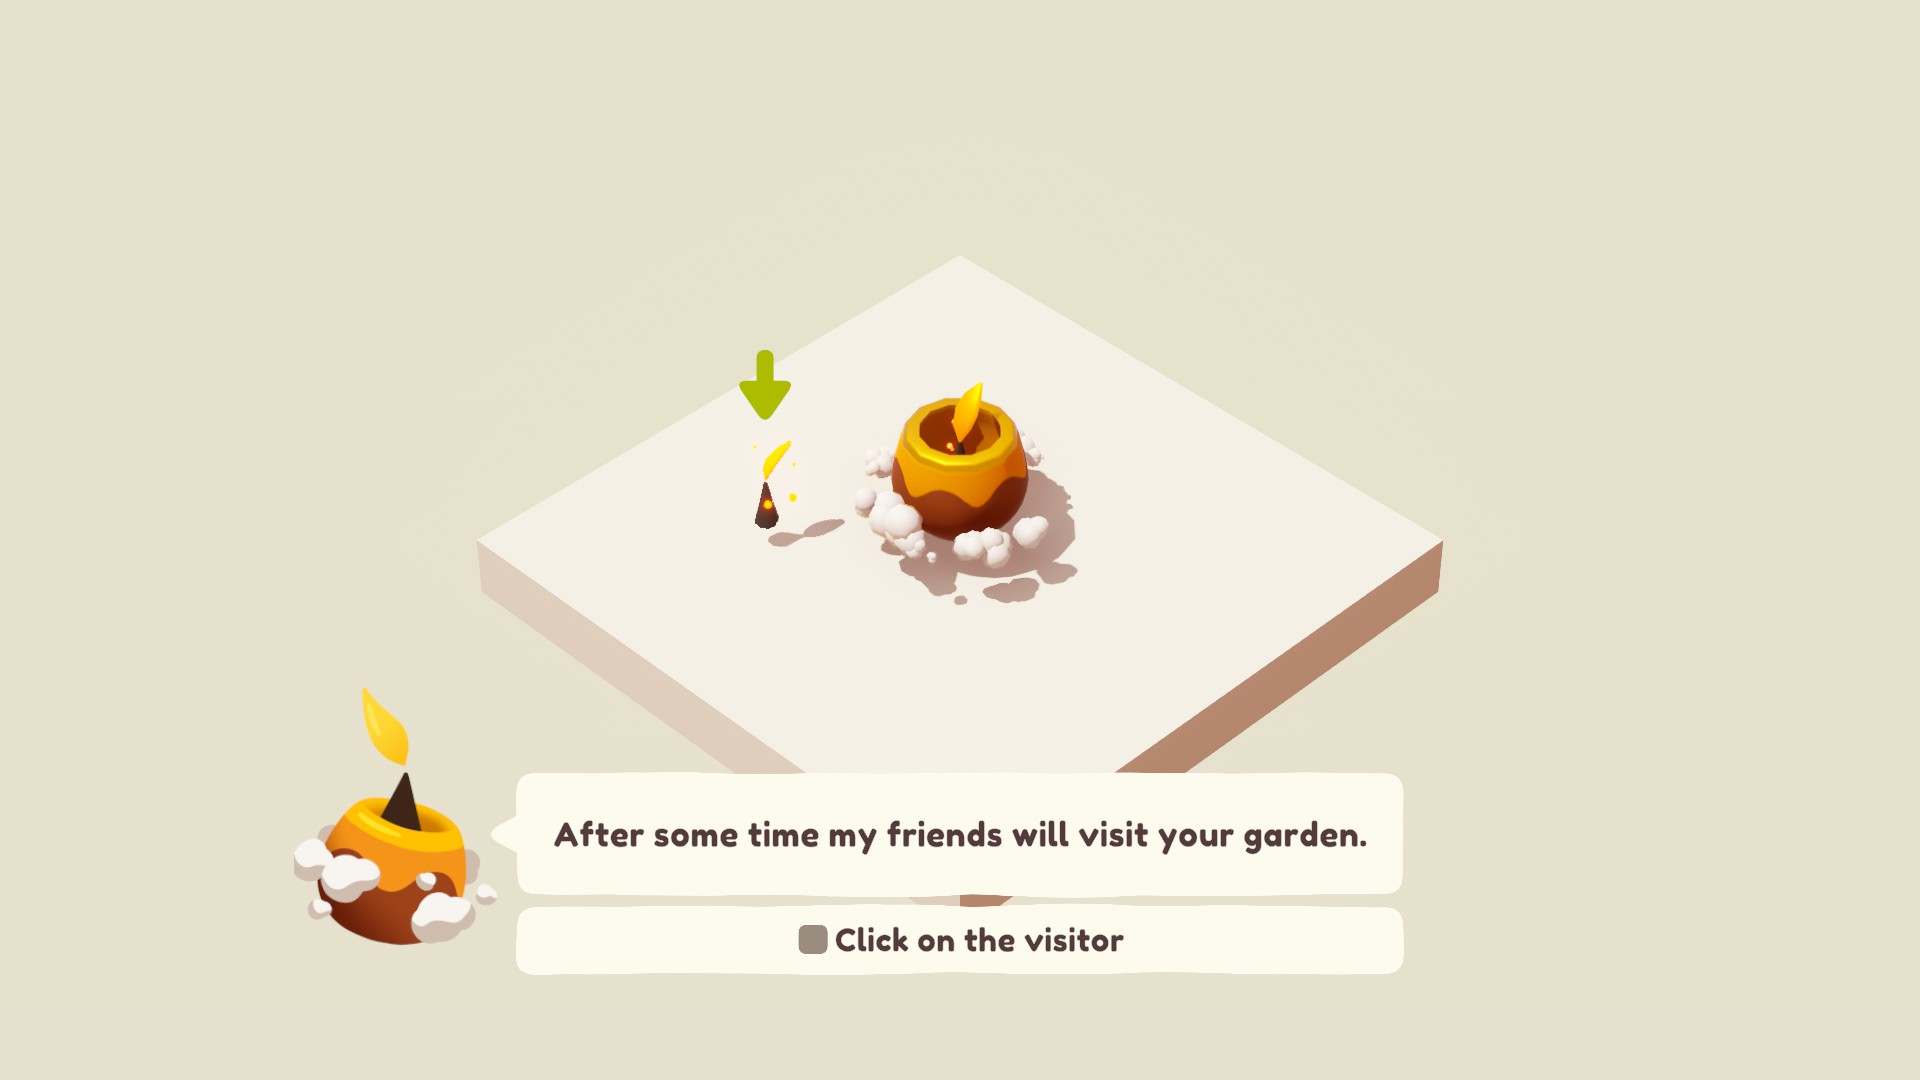 Screenshot from Garden Galaxy showing a plain white square with a yellow and brown clay pot in the center. A tiny triagular creature with a flame on its head is poking out of the top. A similar creature is to the left of the pot, with a green arrow pointing at them. The dialogue one the screen from the pot creature says: After some time my frends will visit your garden. Below is a propmp that says Click on the Visitor.